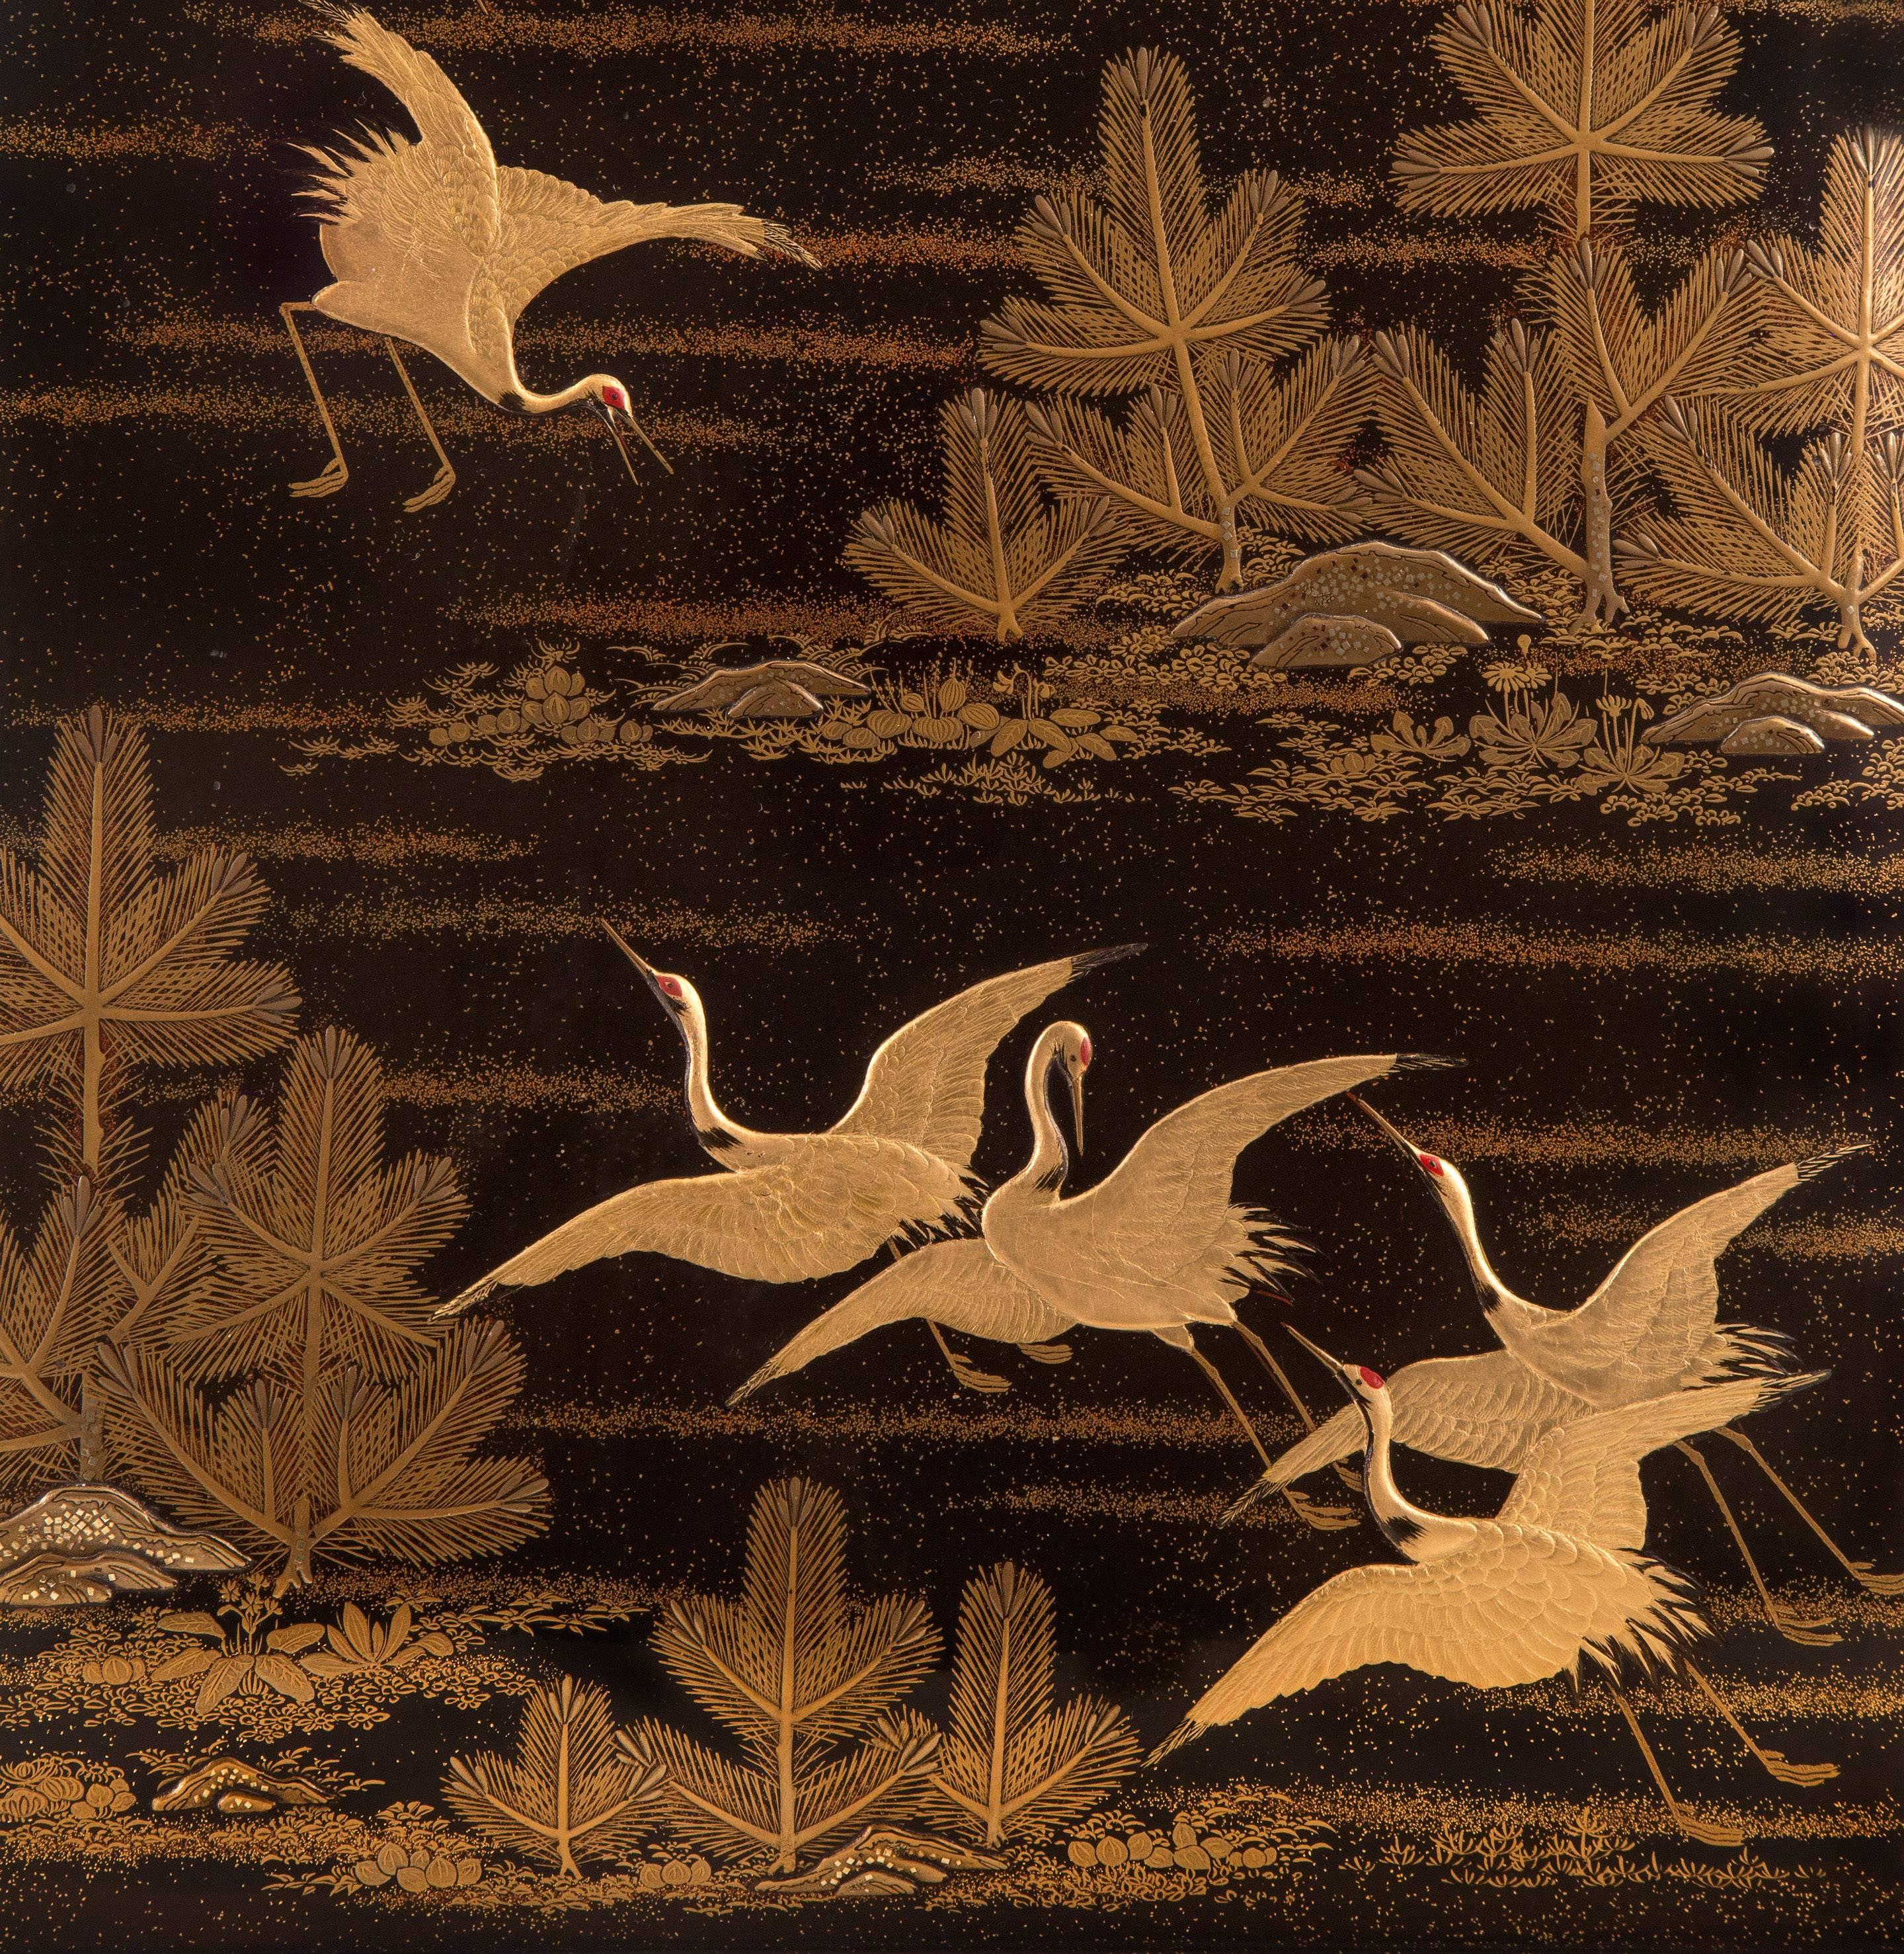 A Large Japanese Gold Lacquer Box (Bunko) Depicting Cranes and Pine Trees For Sale 2